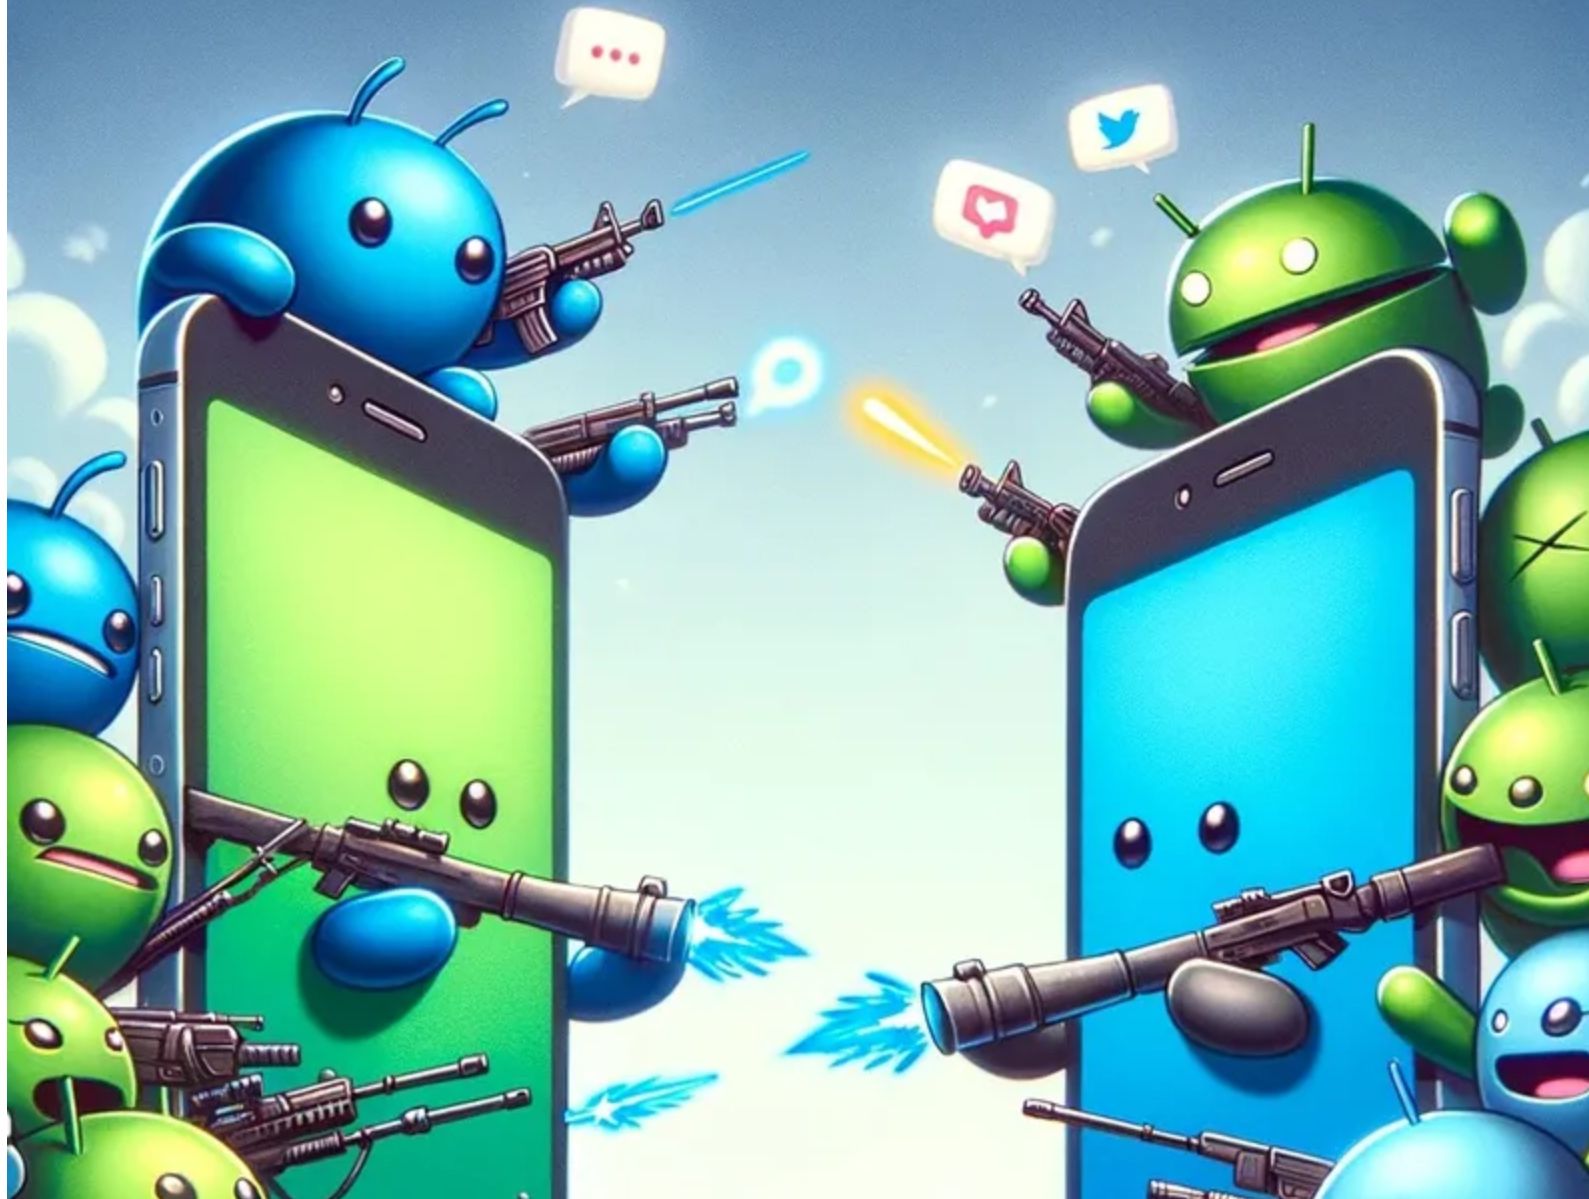 A fictitious messaging war between Android and Apple phones. 